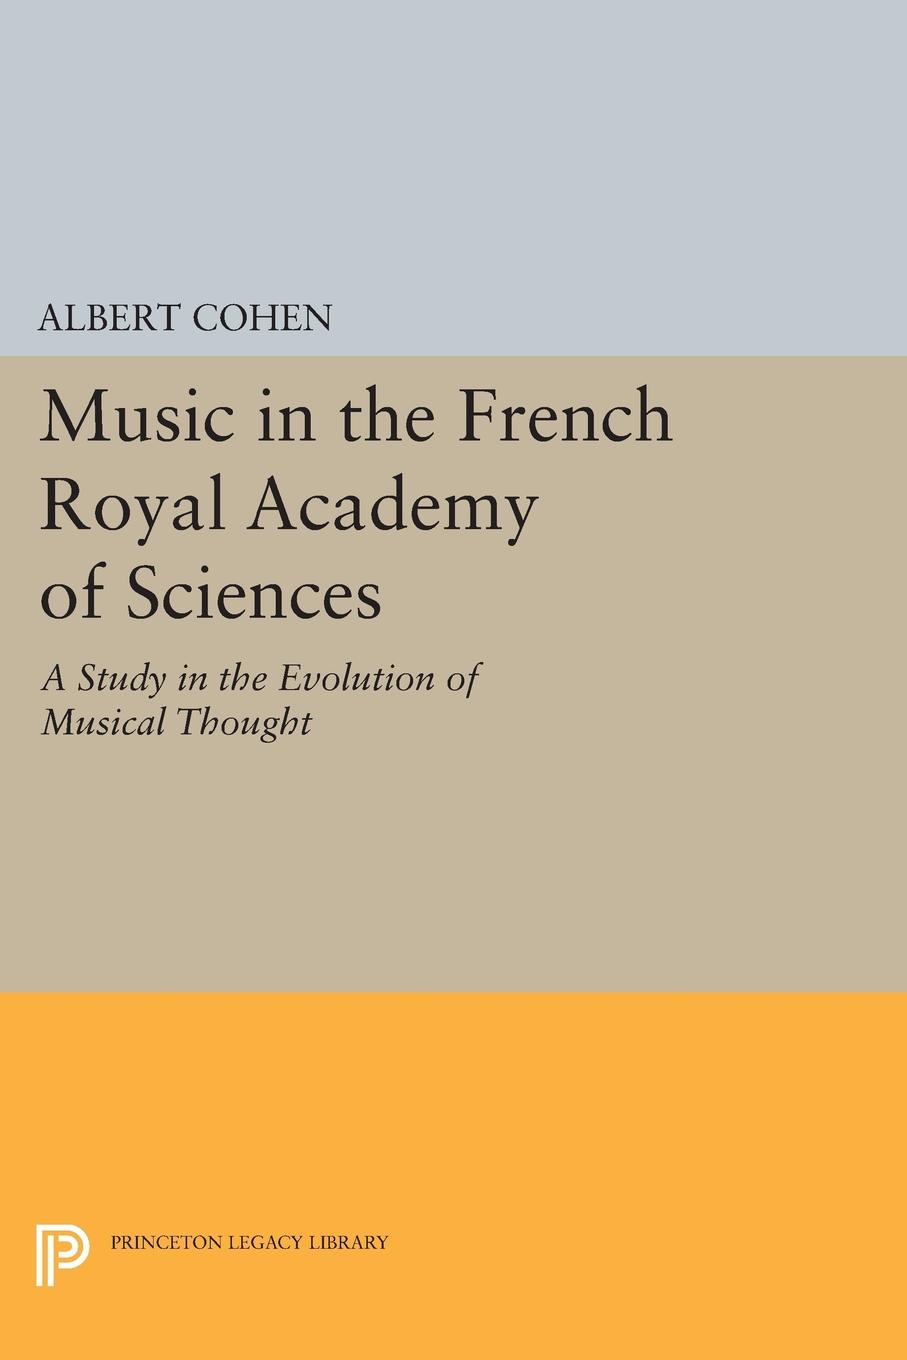 Music in the French Royal Academy of Sciences. A Study in the Evolution of Musical Thought